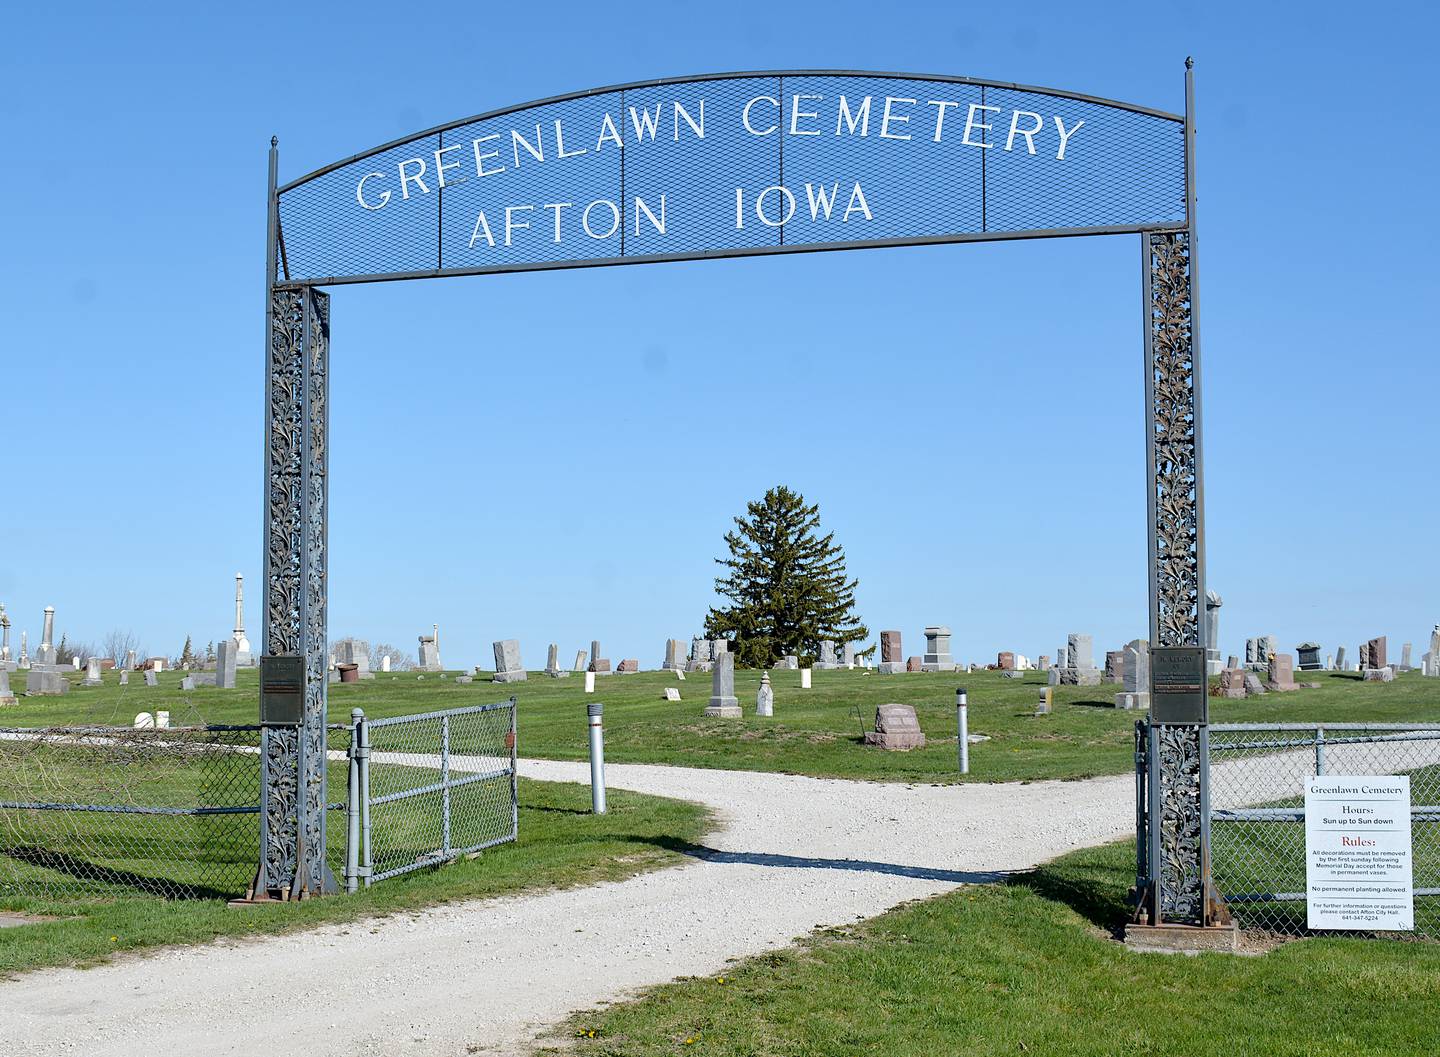 Greenlawn Cemetery was host to volunteers on August 13, helping clean and sweep the grounds of the cemetery of any tree limbs or trash that had arrived during the winter.